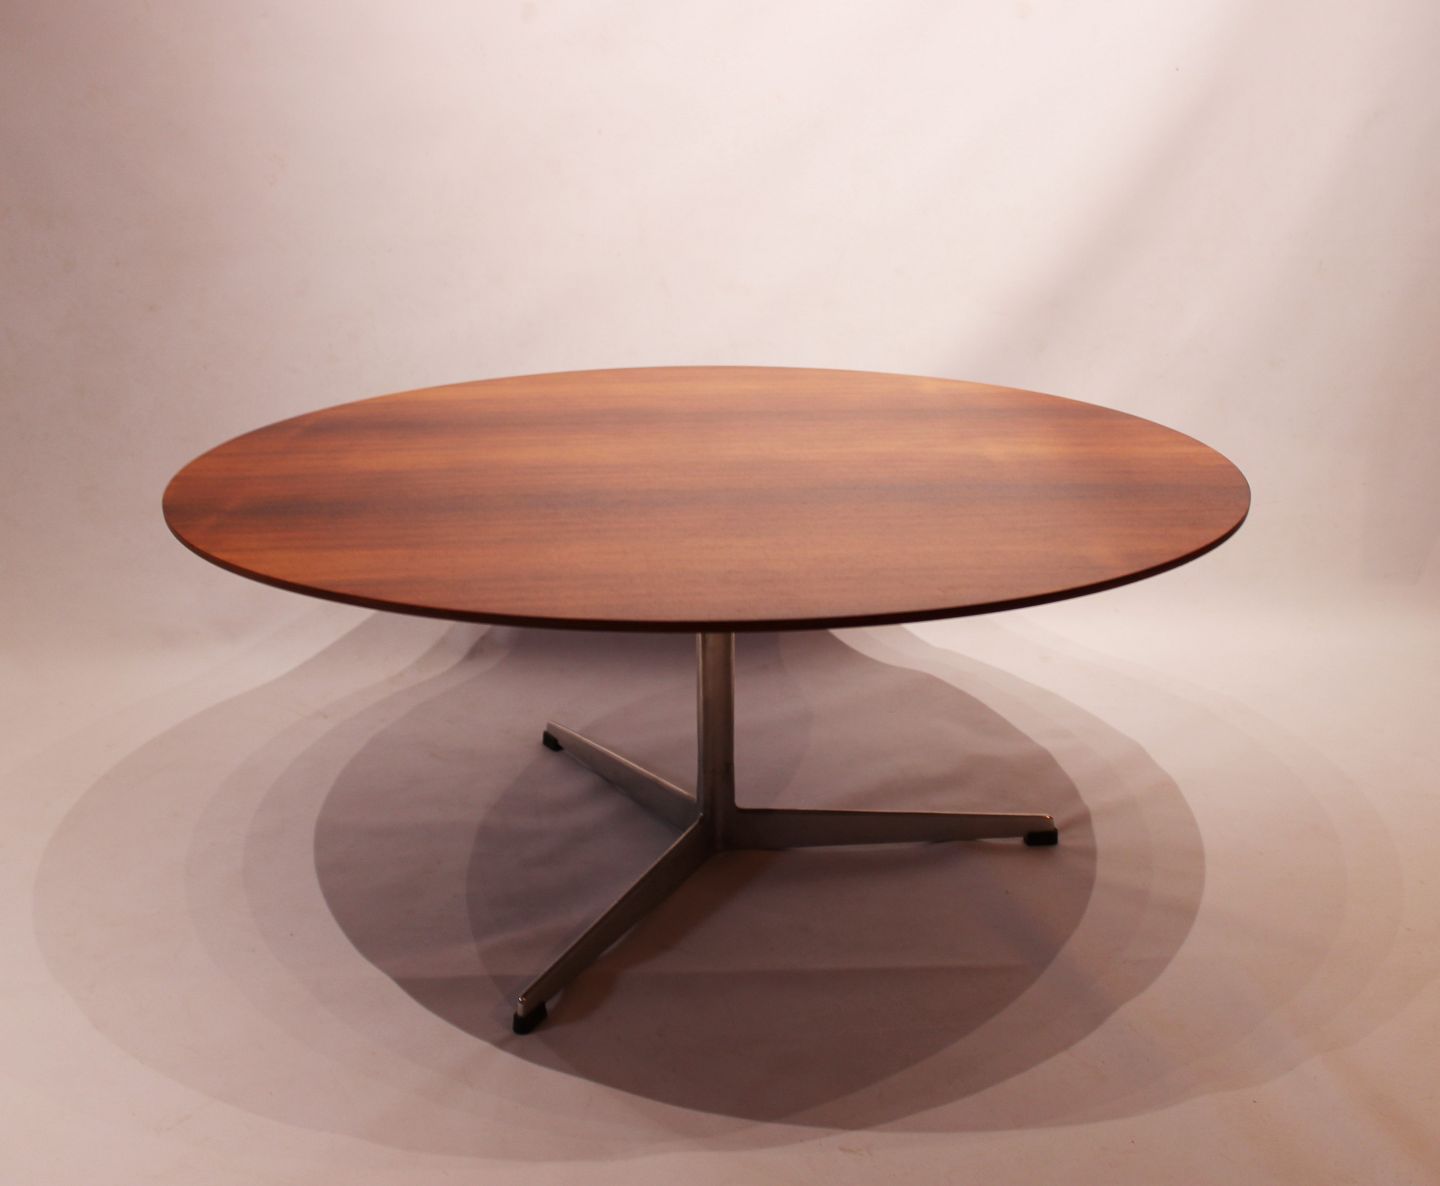 KAD ringen - Round table, 3513, designed by Arne Jacobsen and manufactured by Fr - Round coffee table, model 3513, by Arne Jacobsen and manufactured by Fr